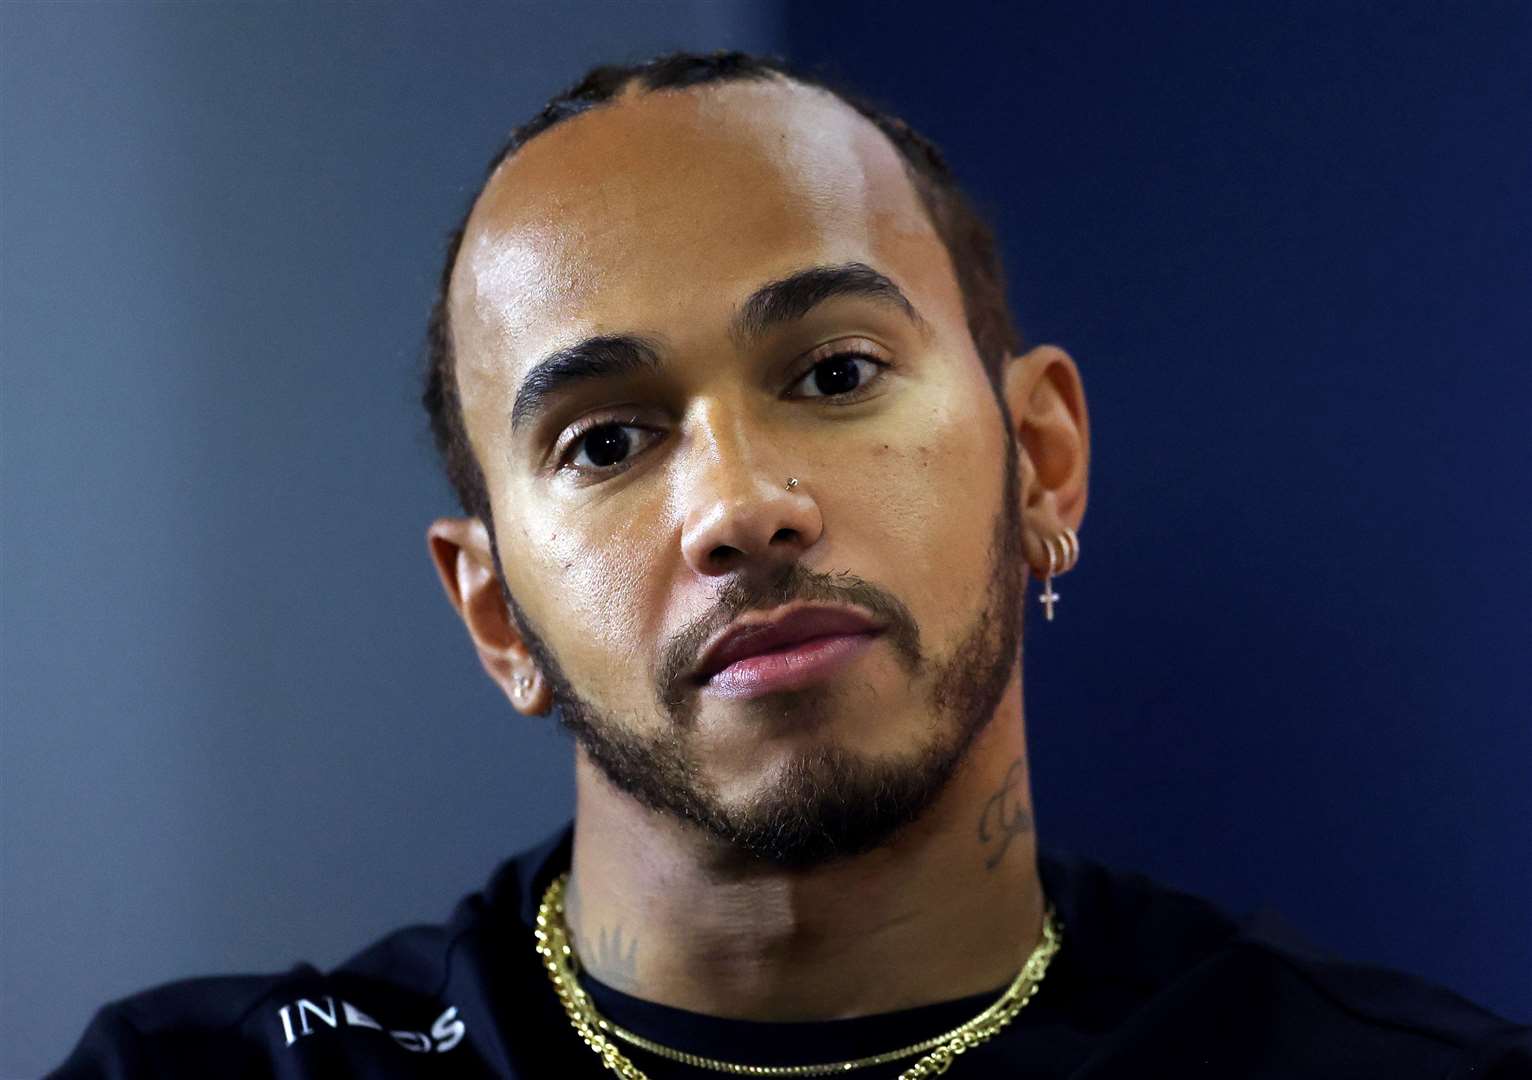 Sir Lewis Hamilton has previously paid tribute to those affected by the Grenfell tragedy (PA)